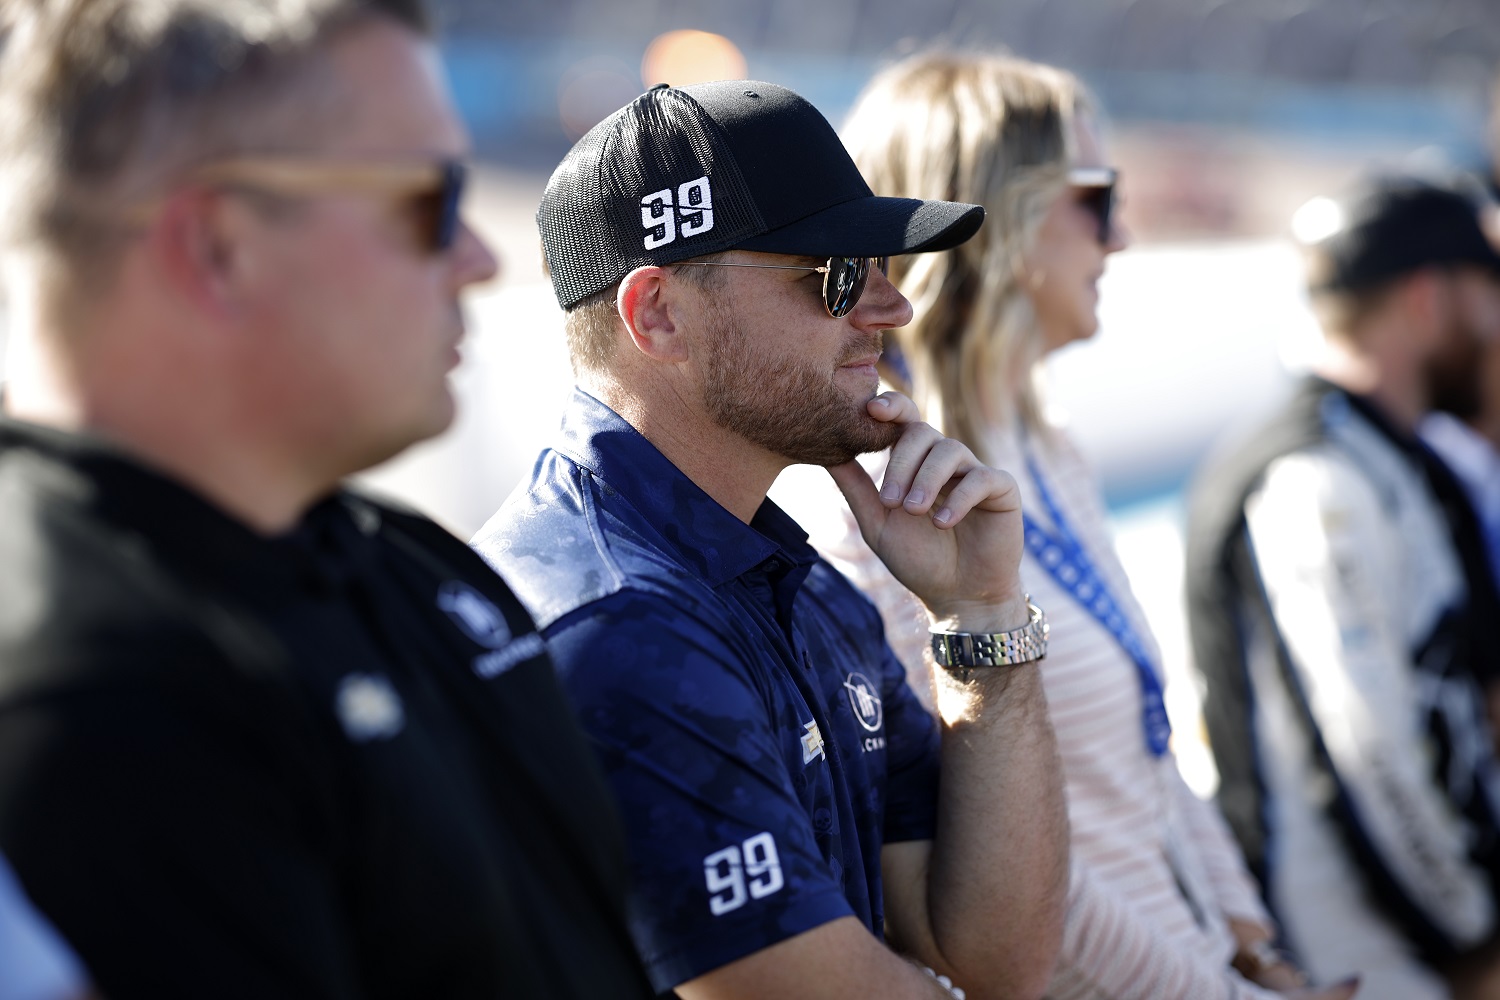 Trackhouse Racing team co-owner Justin Marks waits on the grid prior to the NASCAR Cup Series Championship at Phoenix Raceway on Nov. 6, 2022.